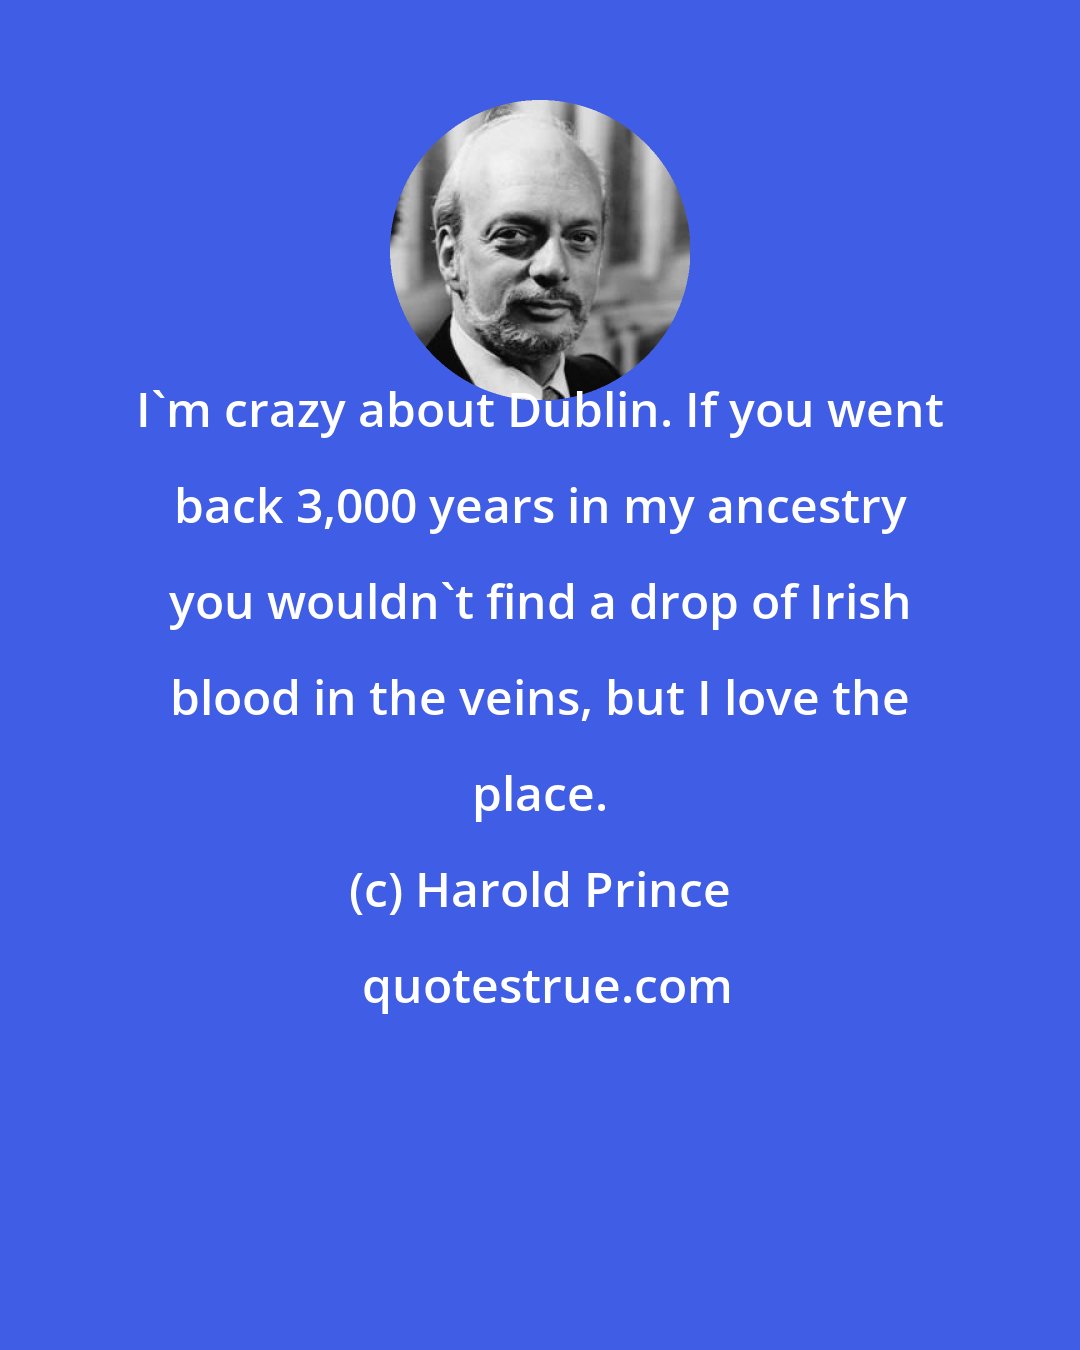 Harold Prince: I'm crazy about Dublin. If you went back 3,000 years in my ancestry you wouldn't find a drop of Irish blood in the veins, but I love the place.